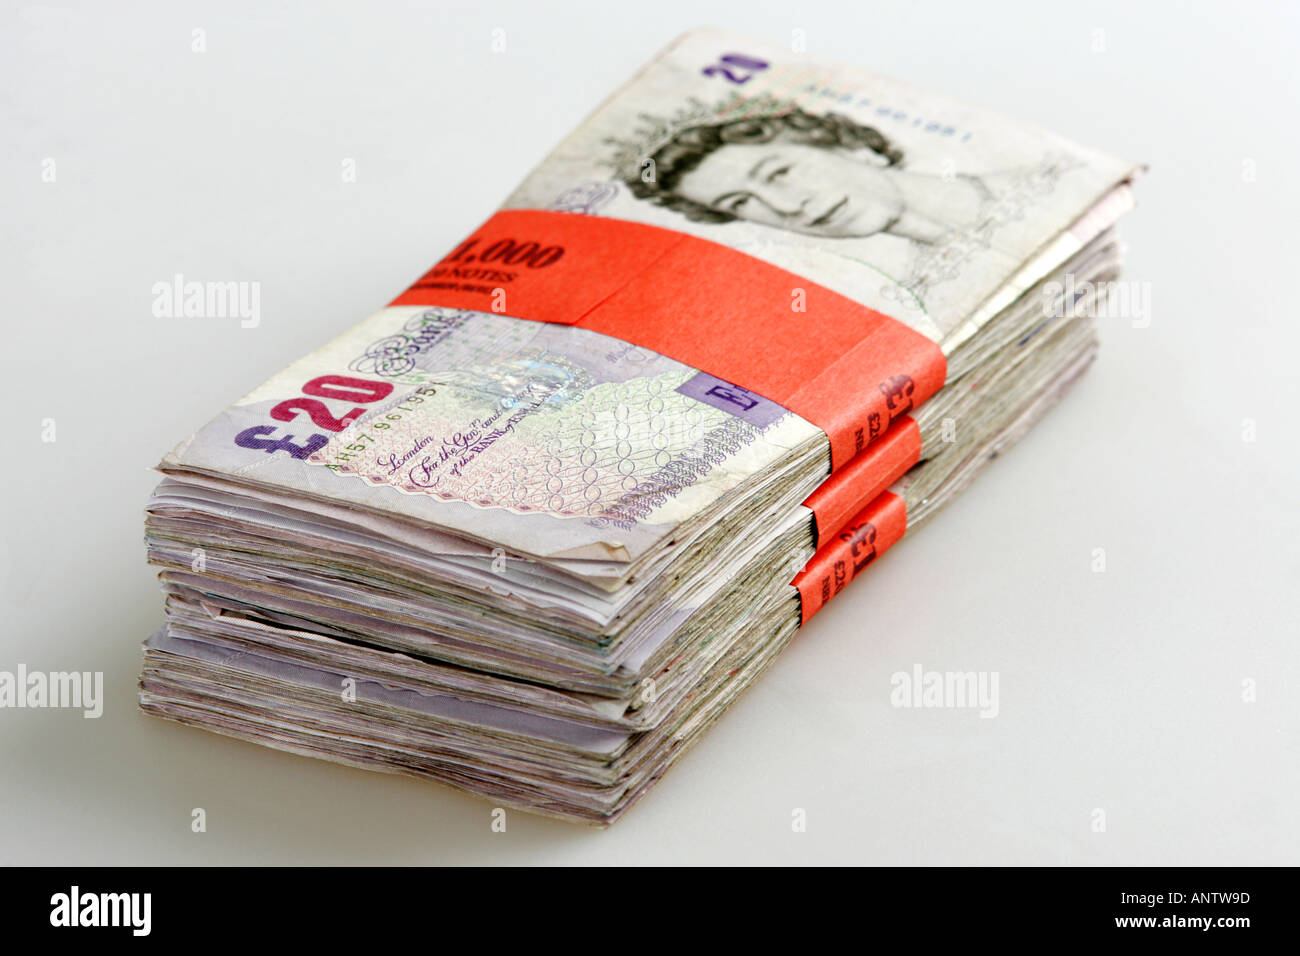 Wad of Cash £20 notes Stock Photo